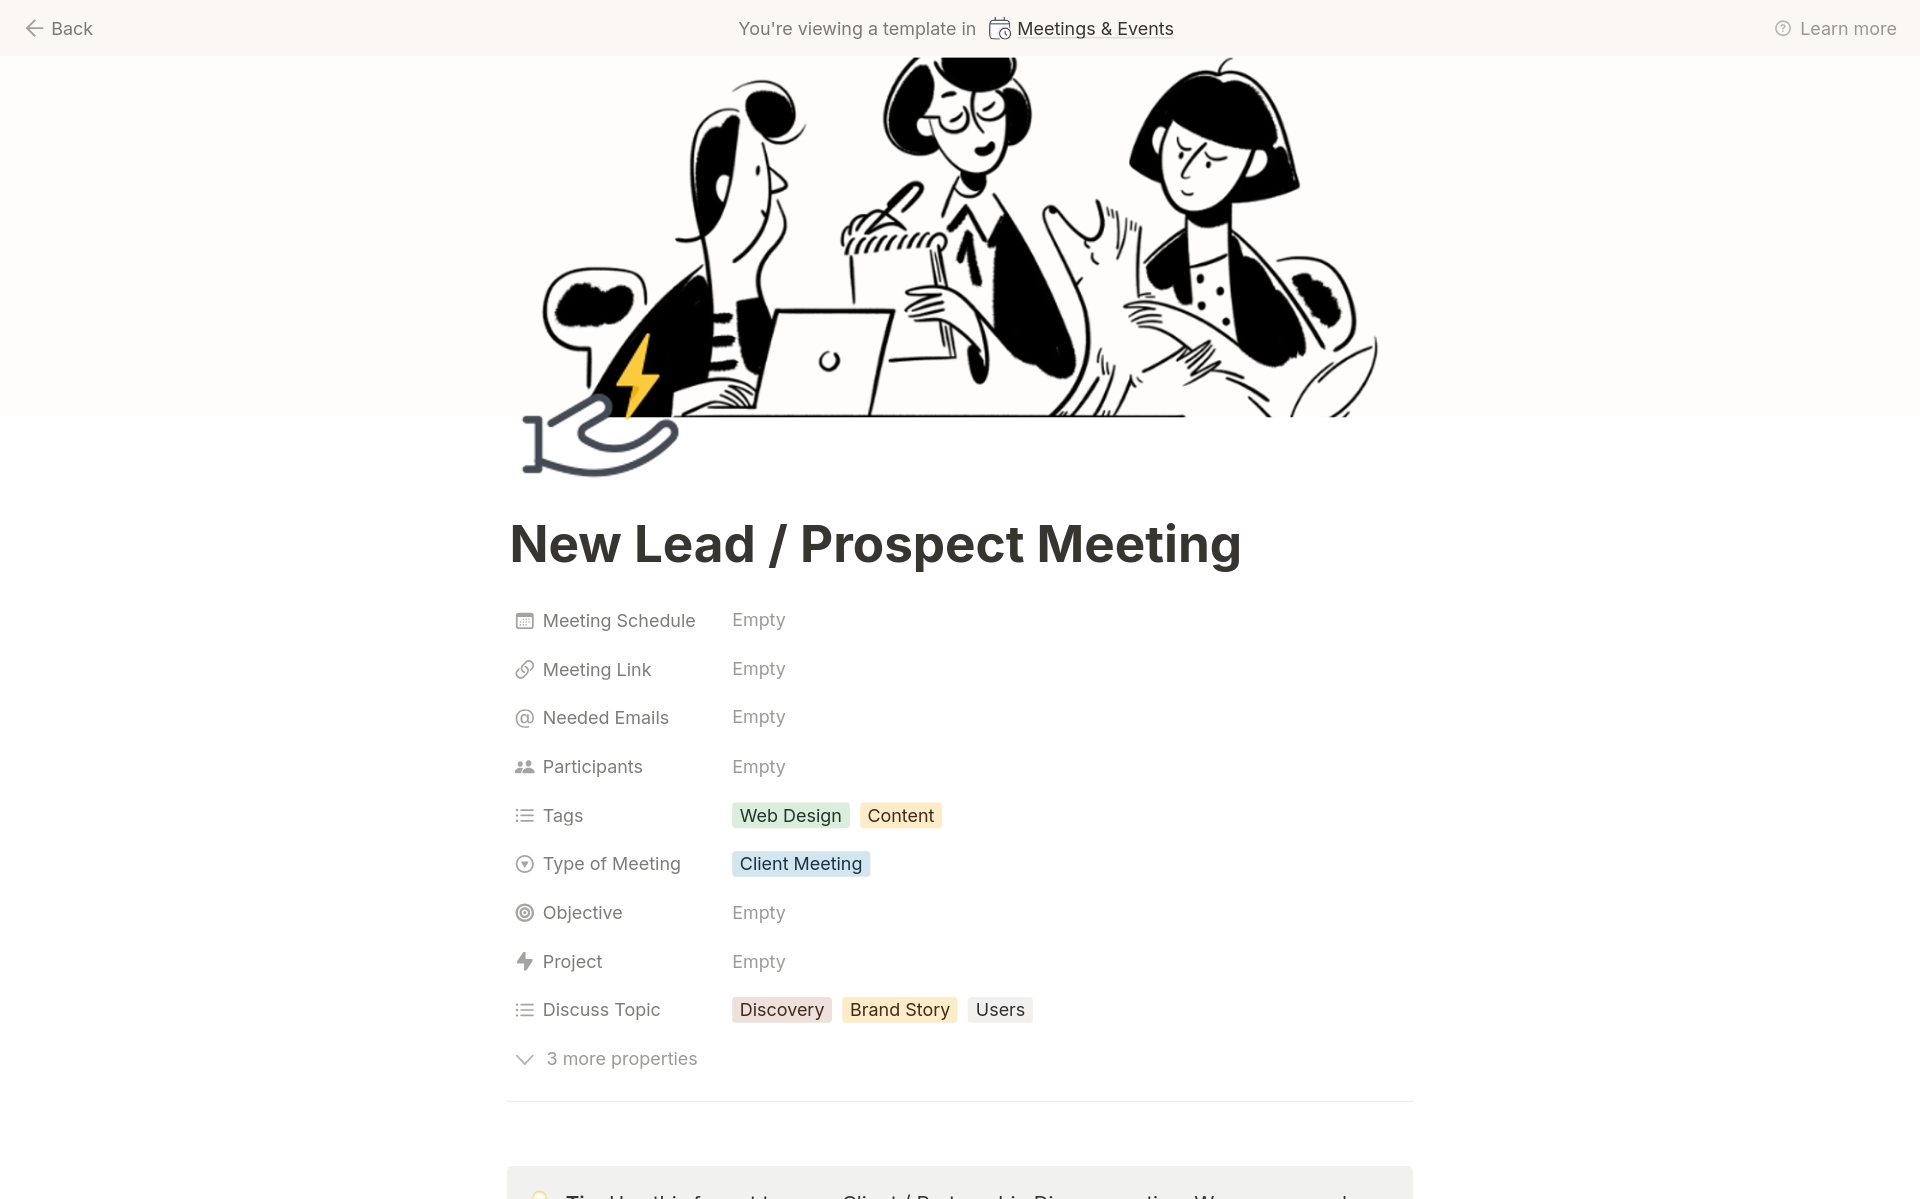 Meetings, Events & Notes template on Notion – your go-to solution for organizing all your important gatherings and jotting down key takeaways. >>>